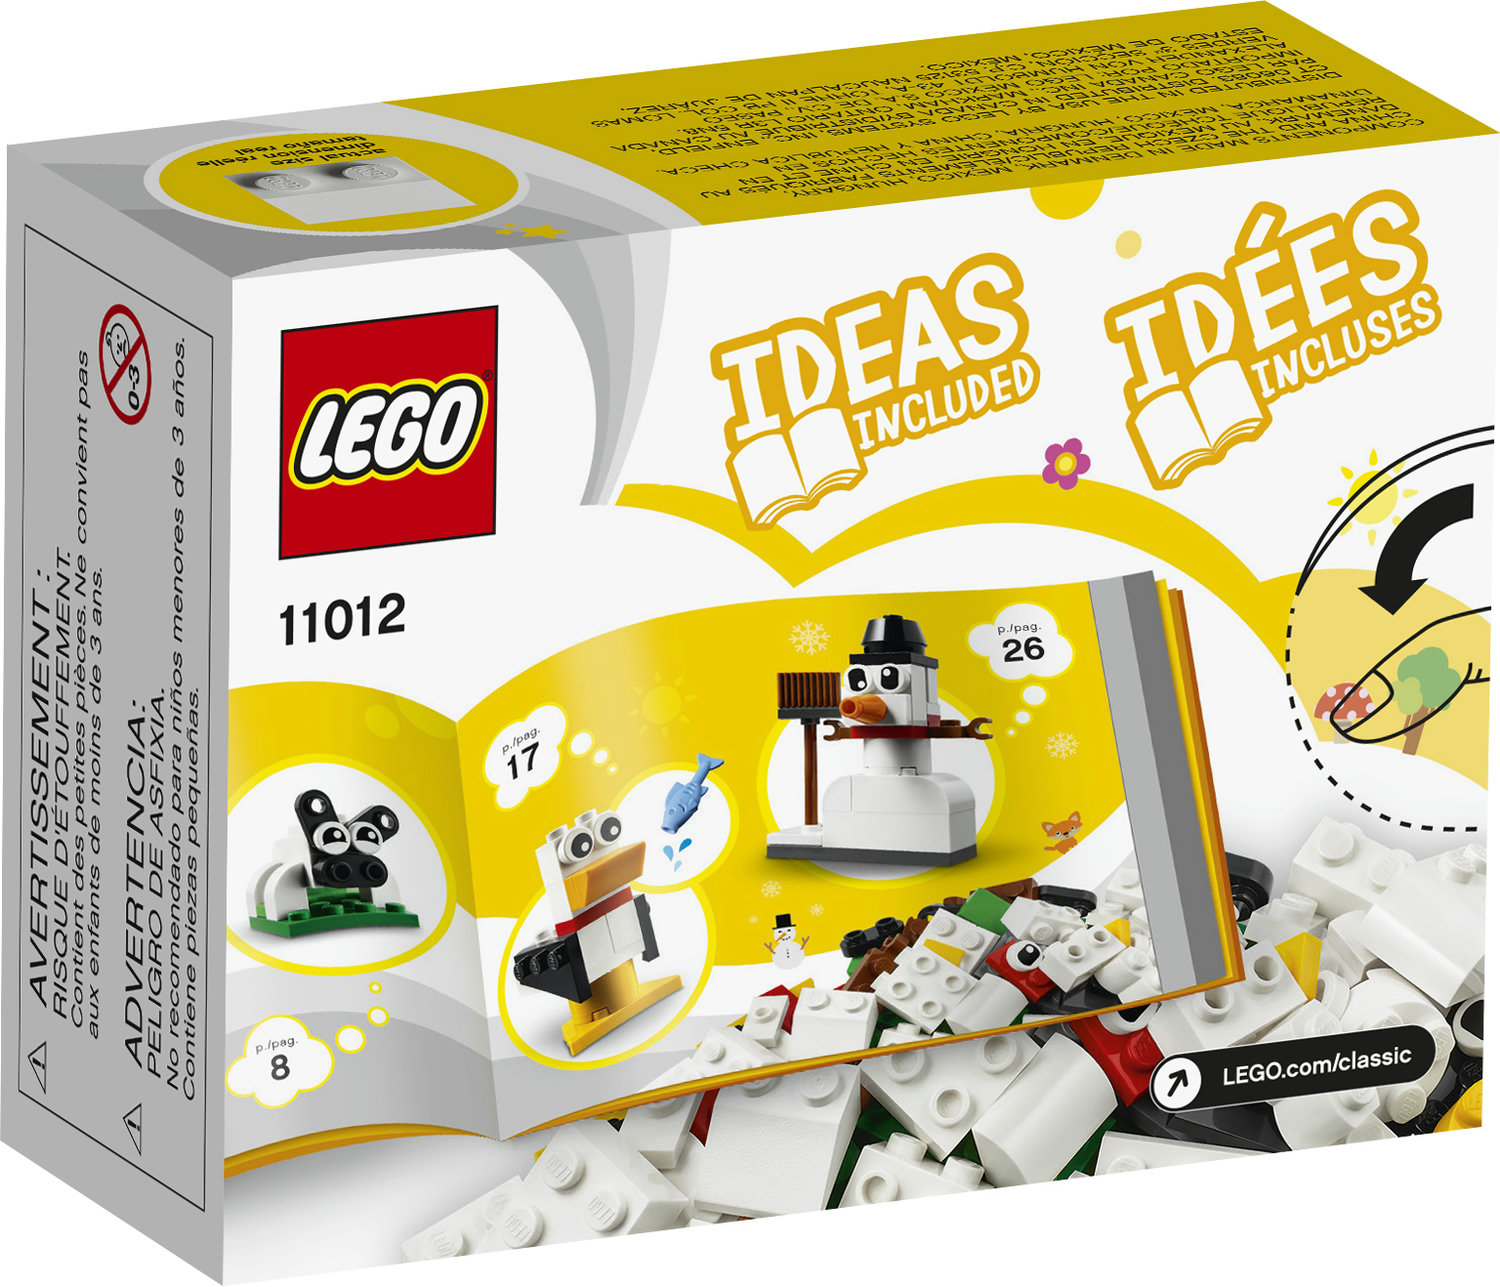 LEGO Classic Creative White Bricks 11012 Building Toy to Inspire Creative Play (60 Pieces) - image 3 of 5